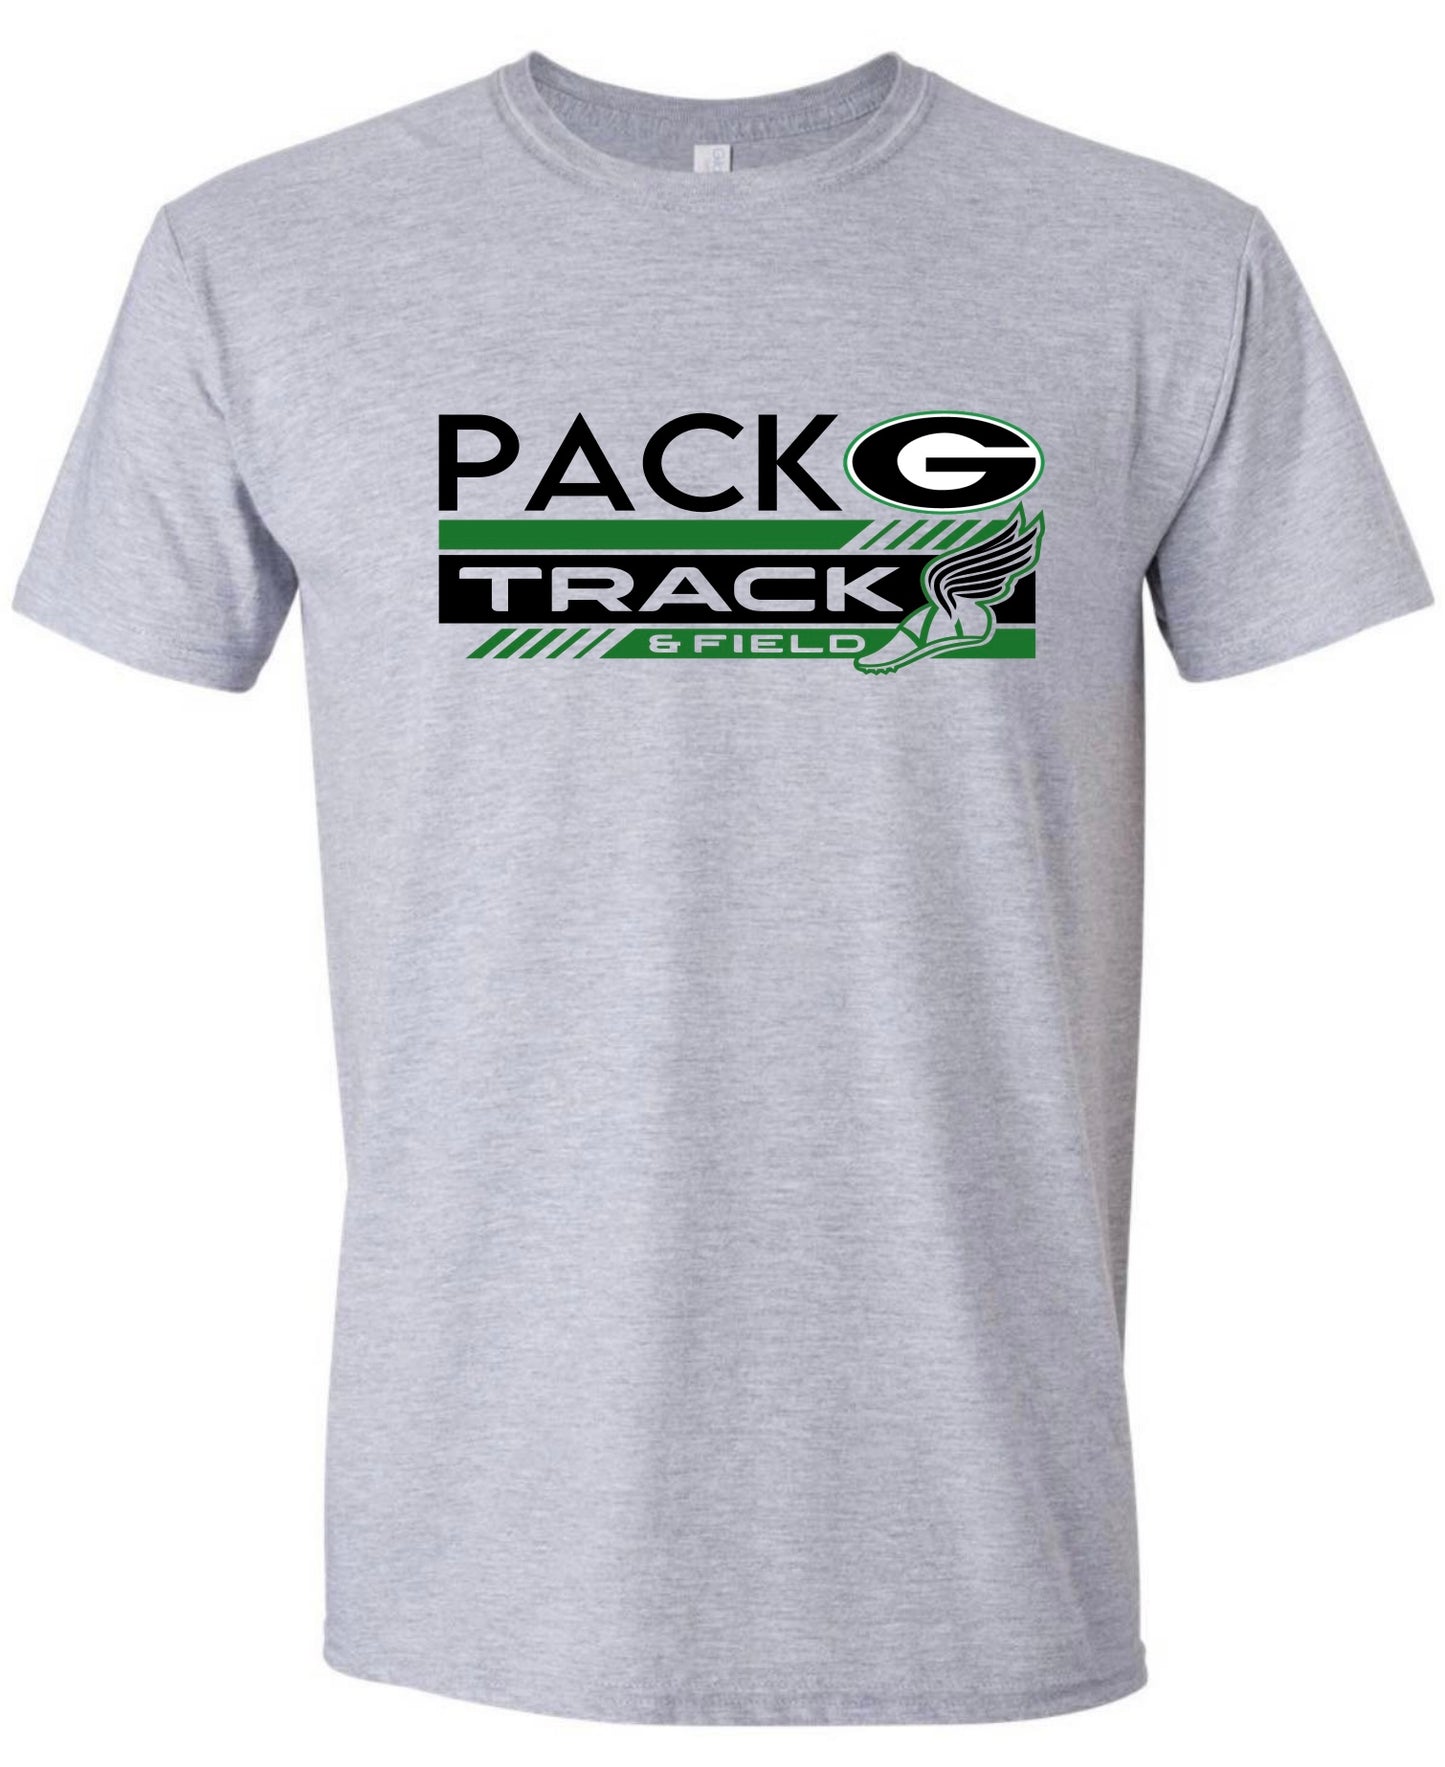 Pack Track and Field Tshirt